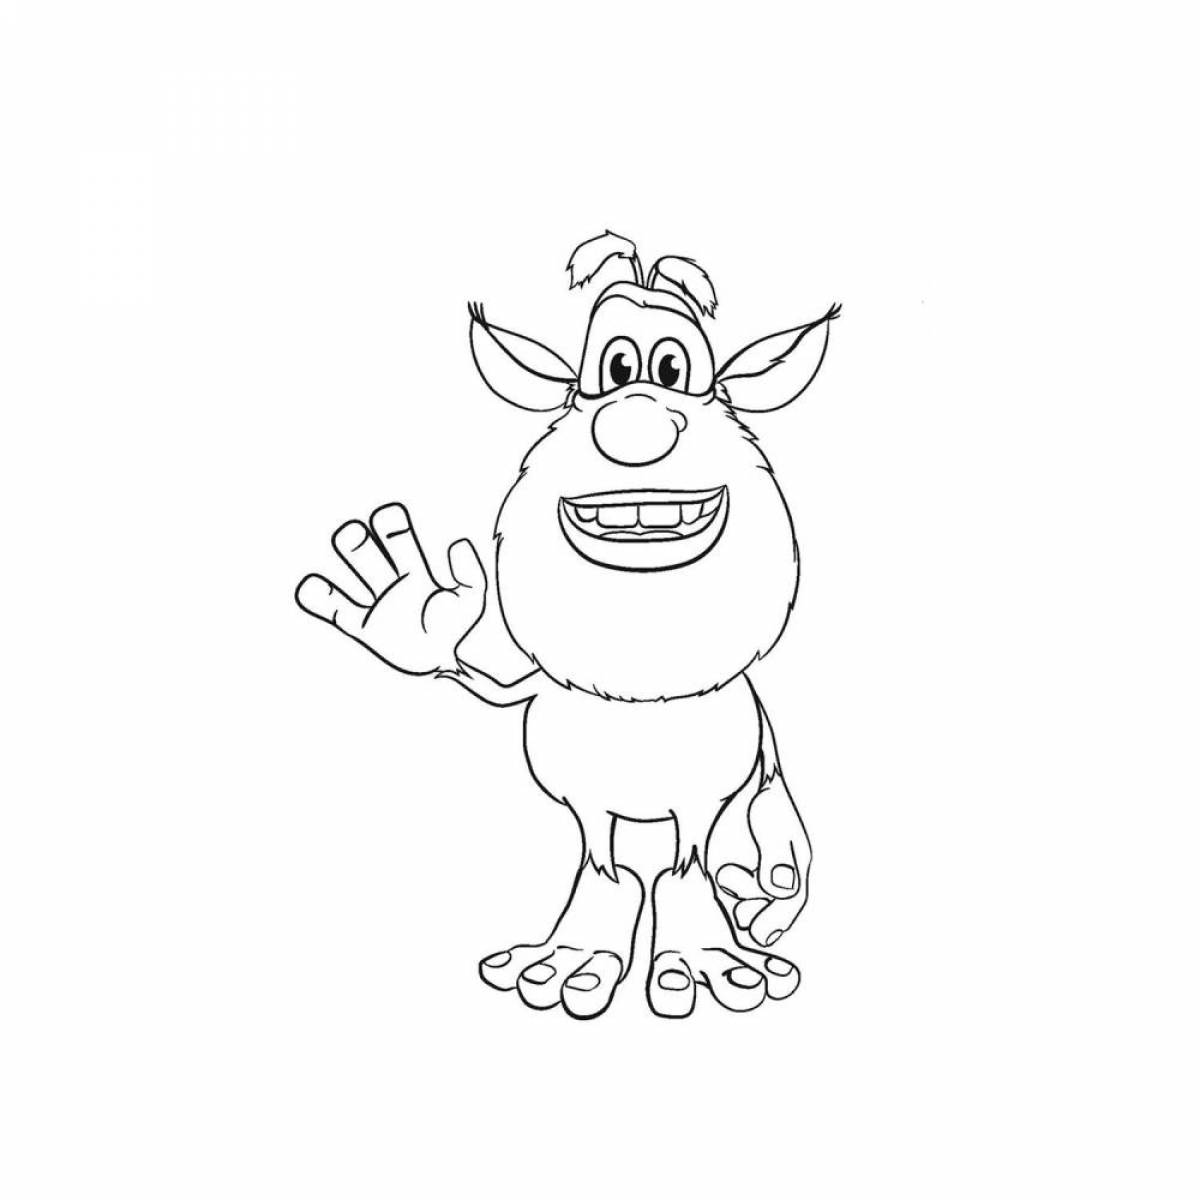 Animated buba coloring page for the little ones